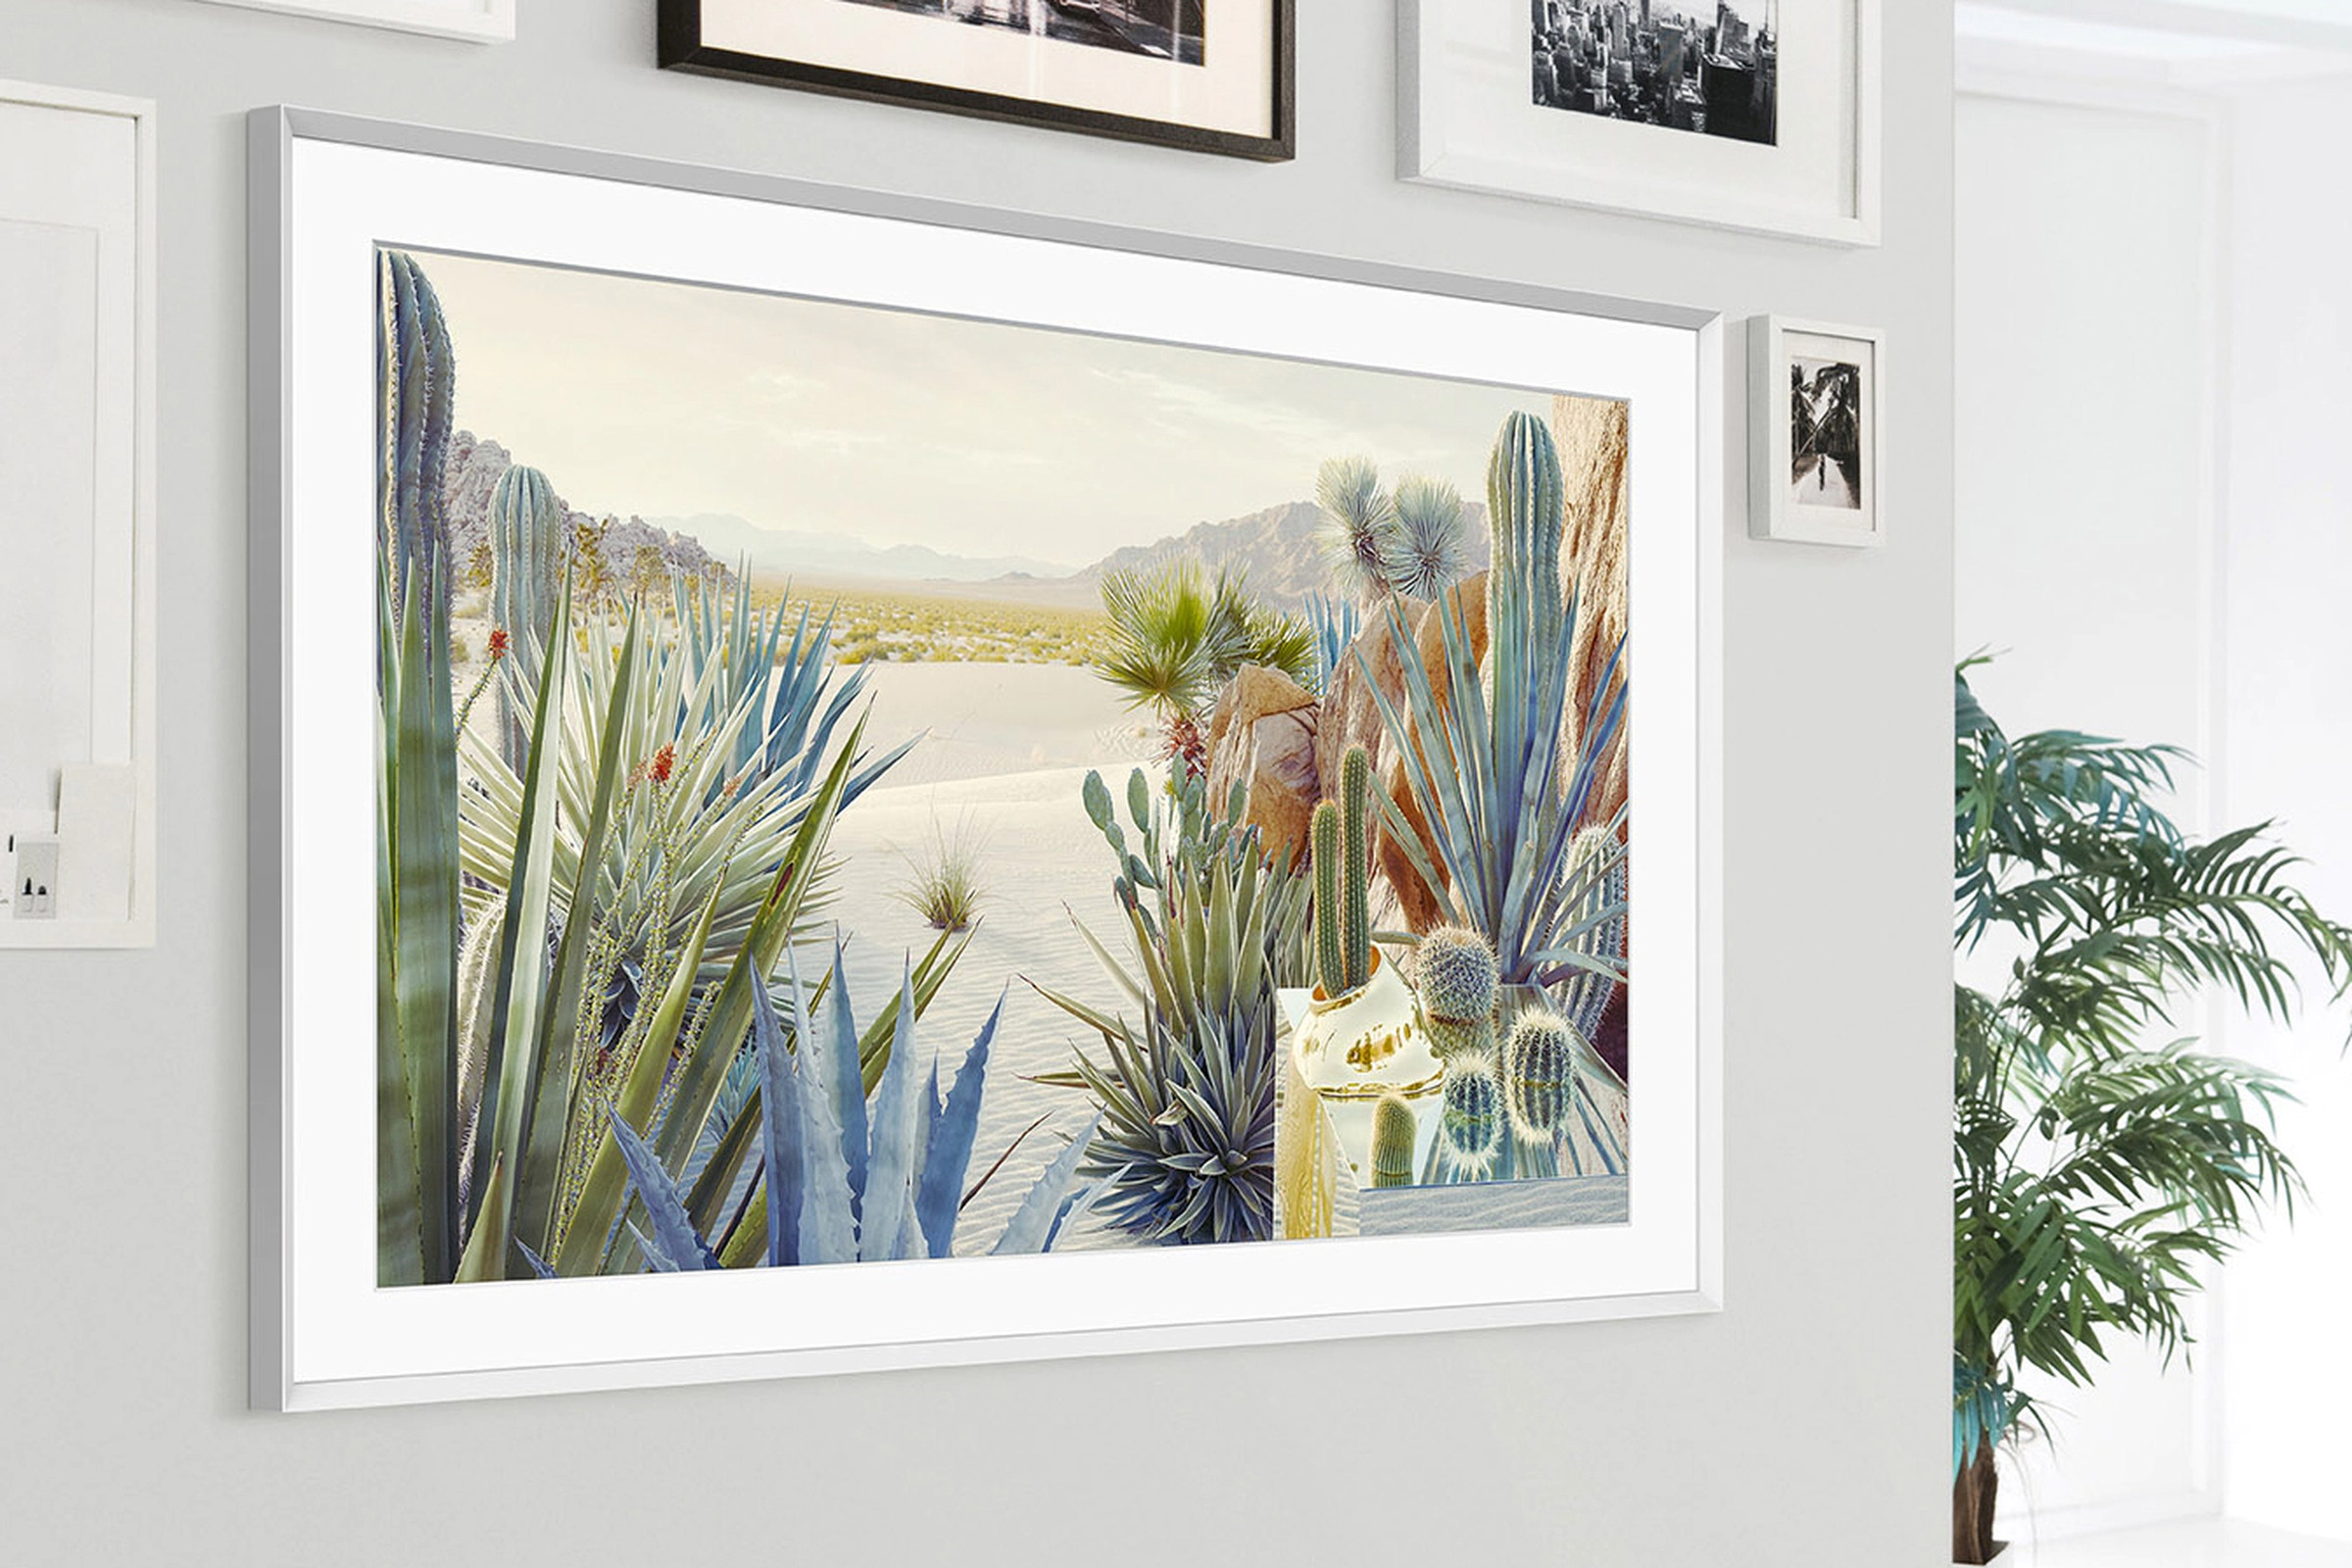 A close-up image of Samsung’s 2022 Frame TV hanging on a wall with a bunch of cacti on display.